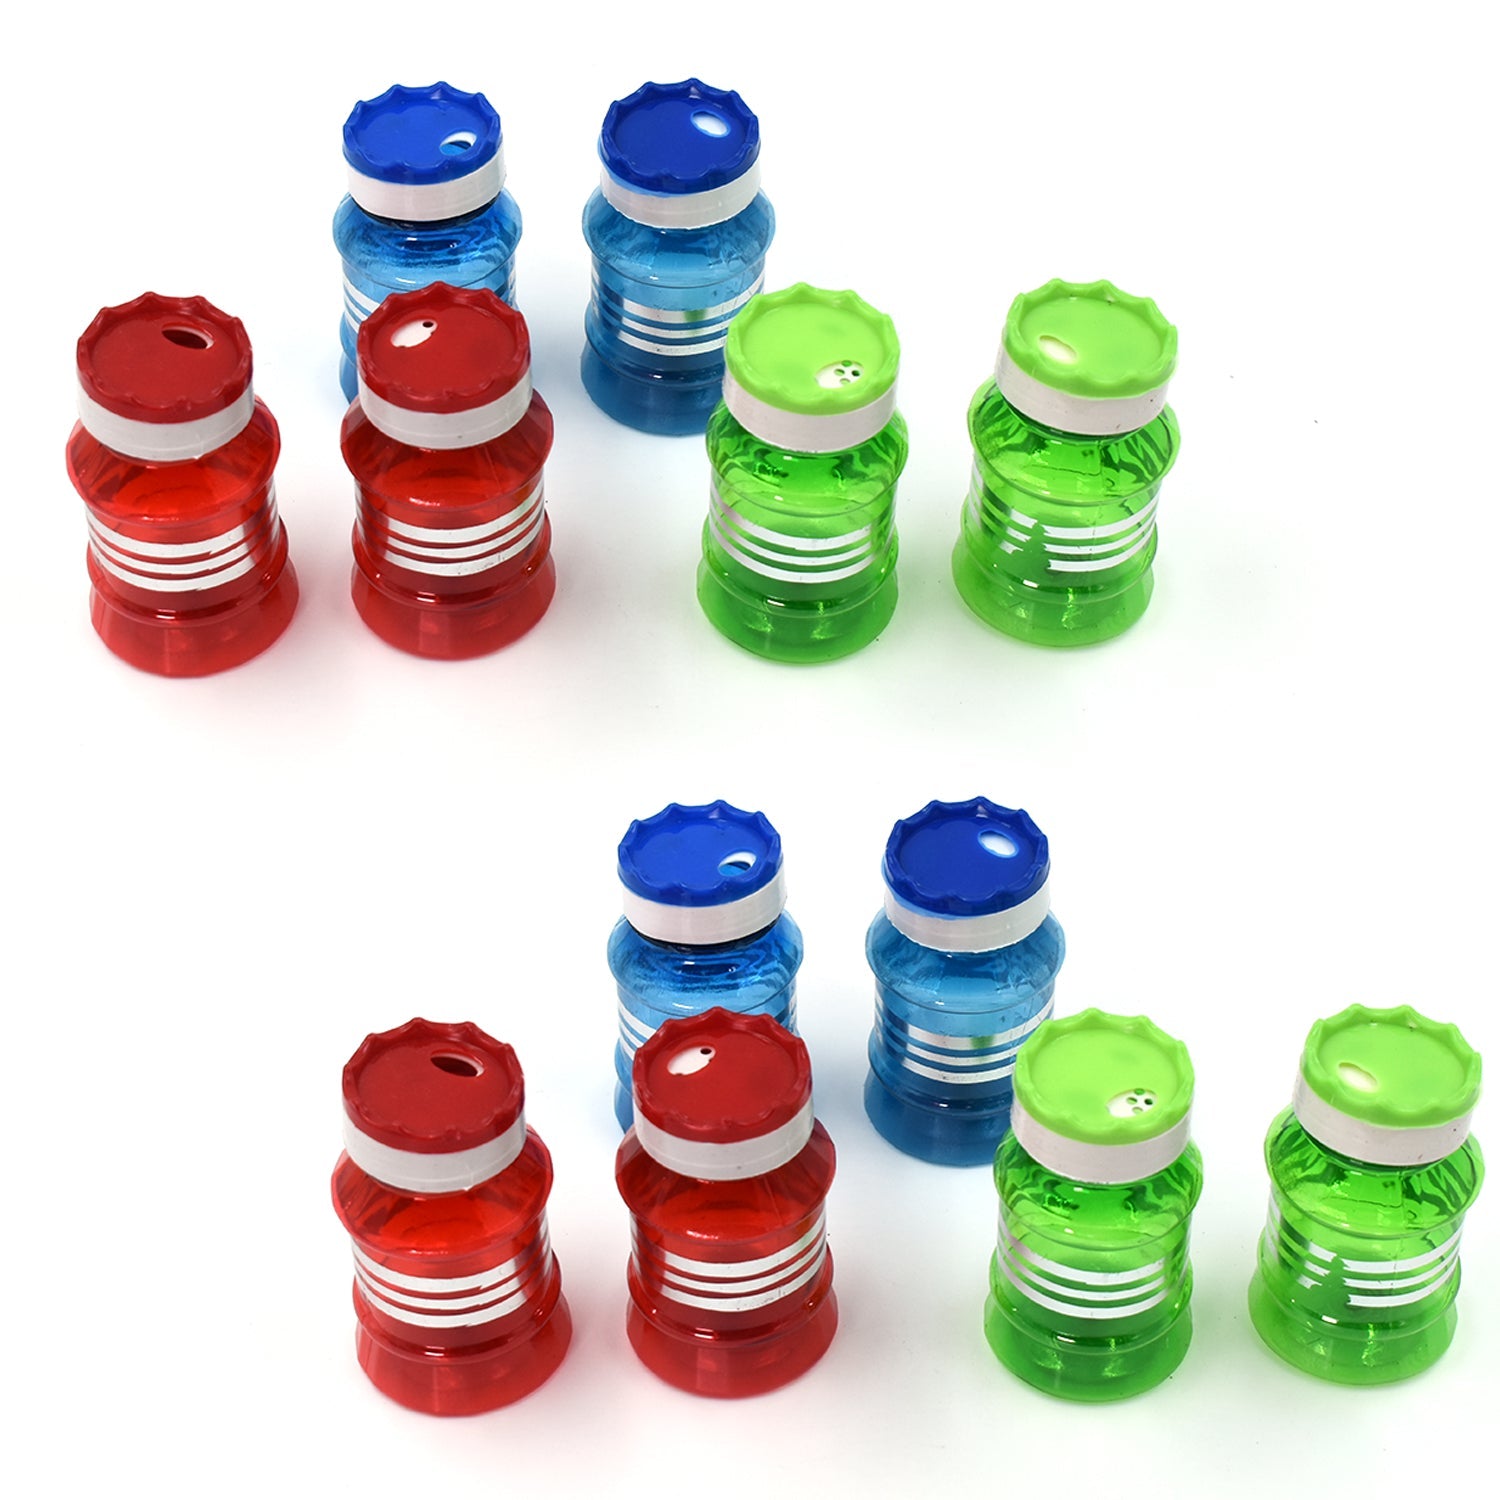 3732 12 Pc Salt N Shaker Set used in all kinds of household and official places during serving of foods and stuff etc.